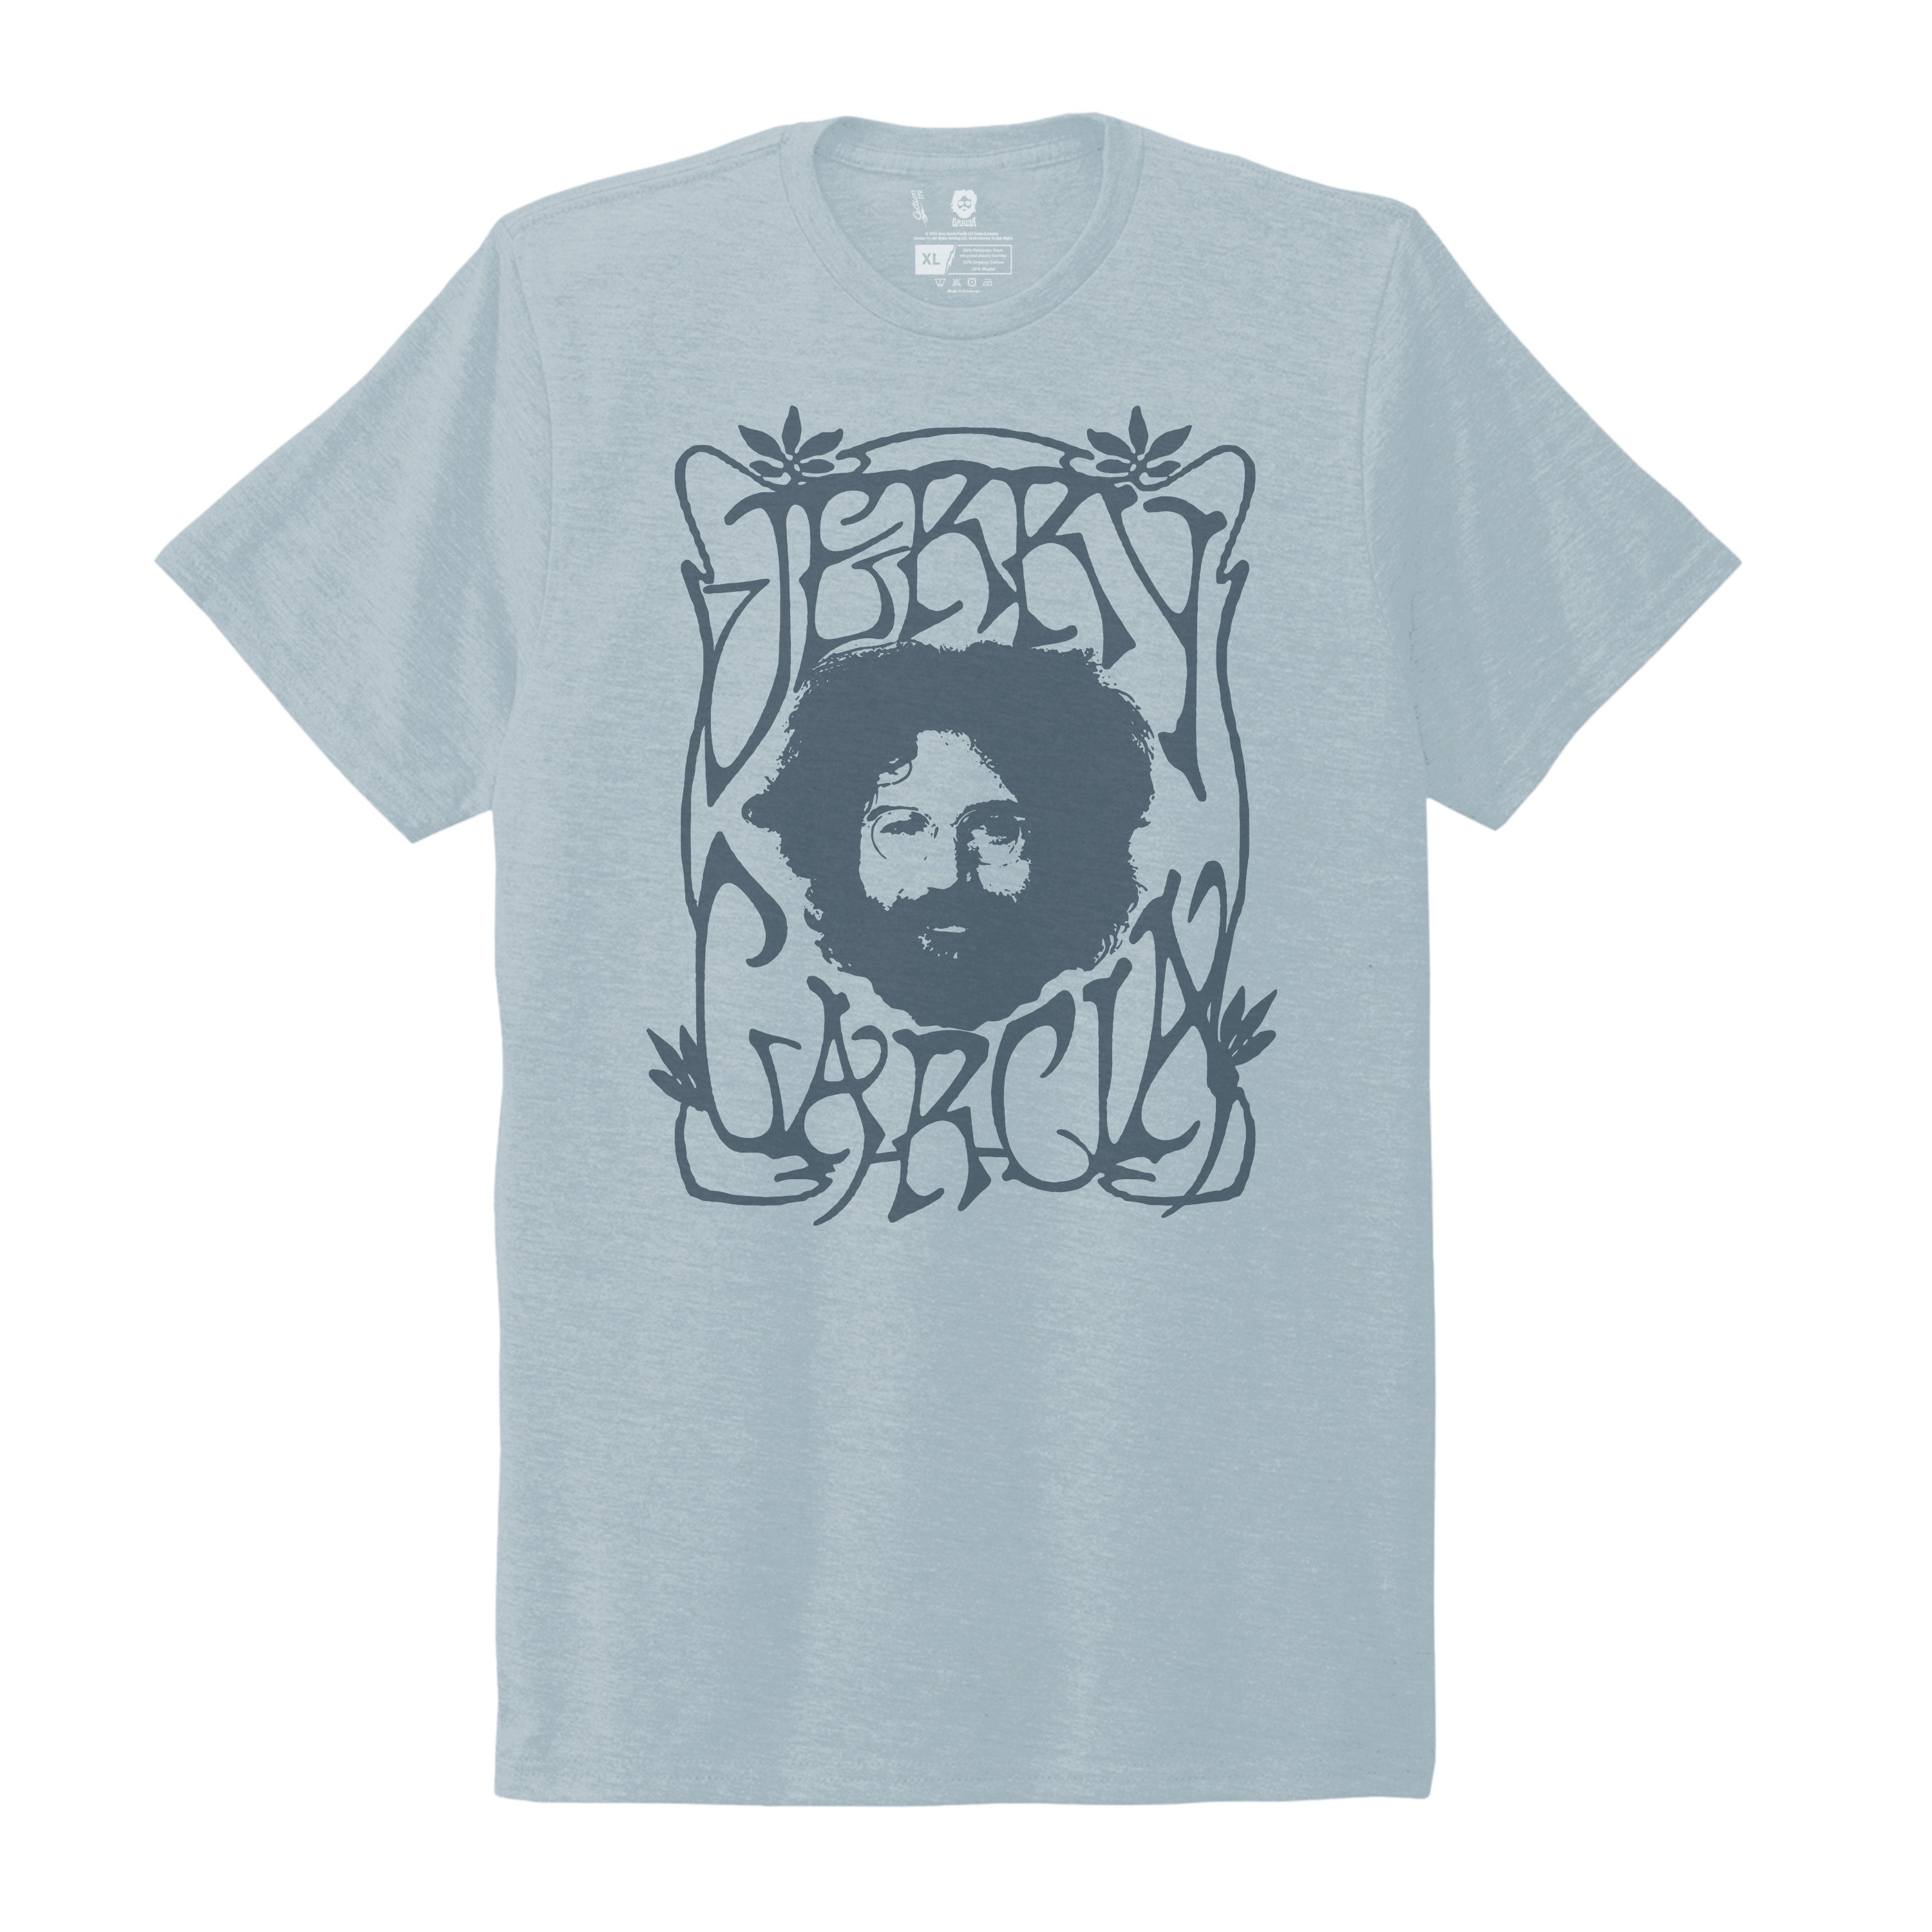 T-Shirt Jerry Eco Jerry Section Blue 119 & Graphic– Name Garcia